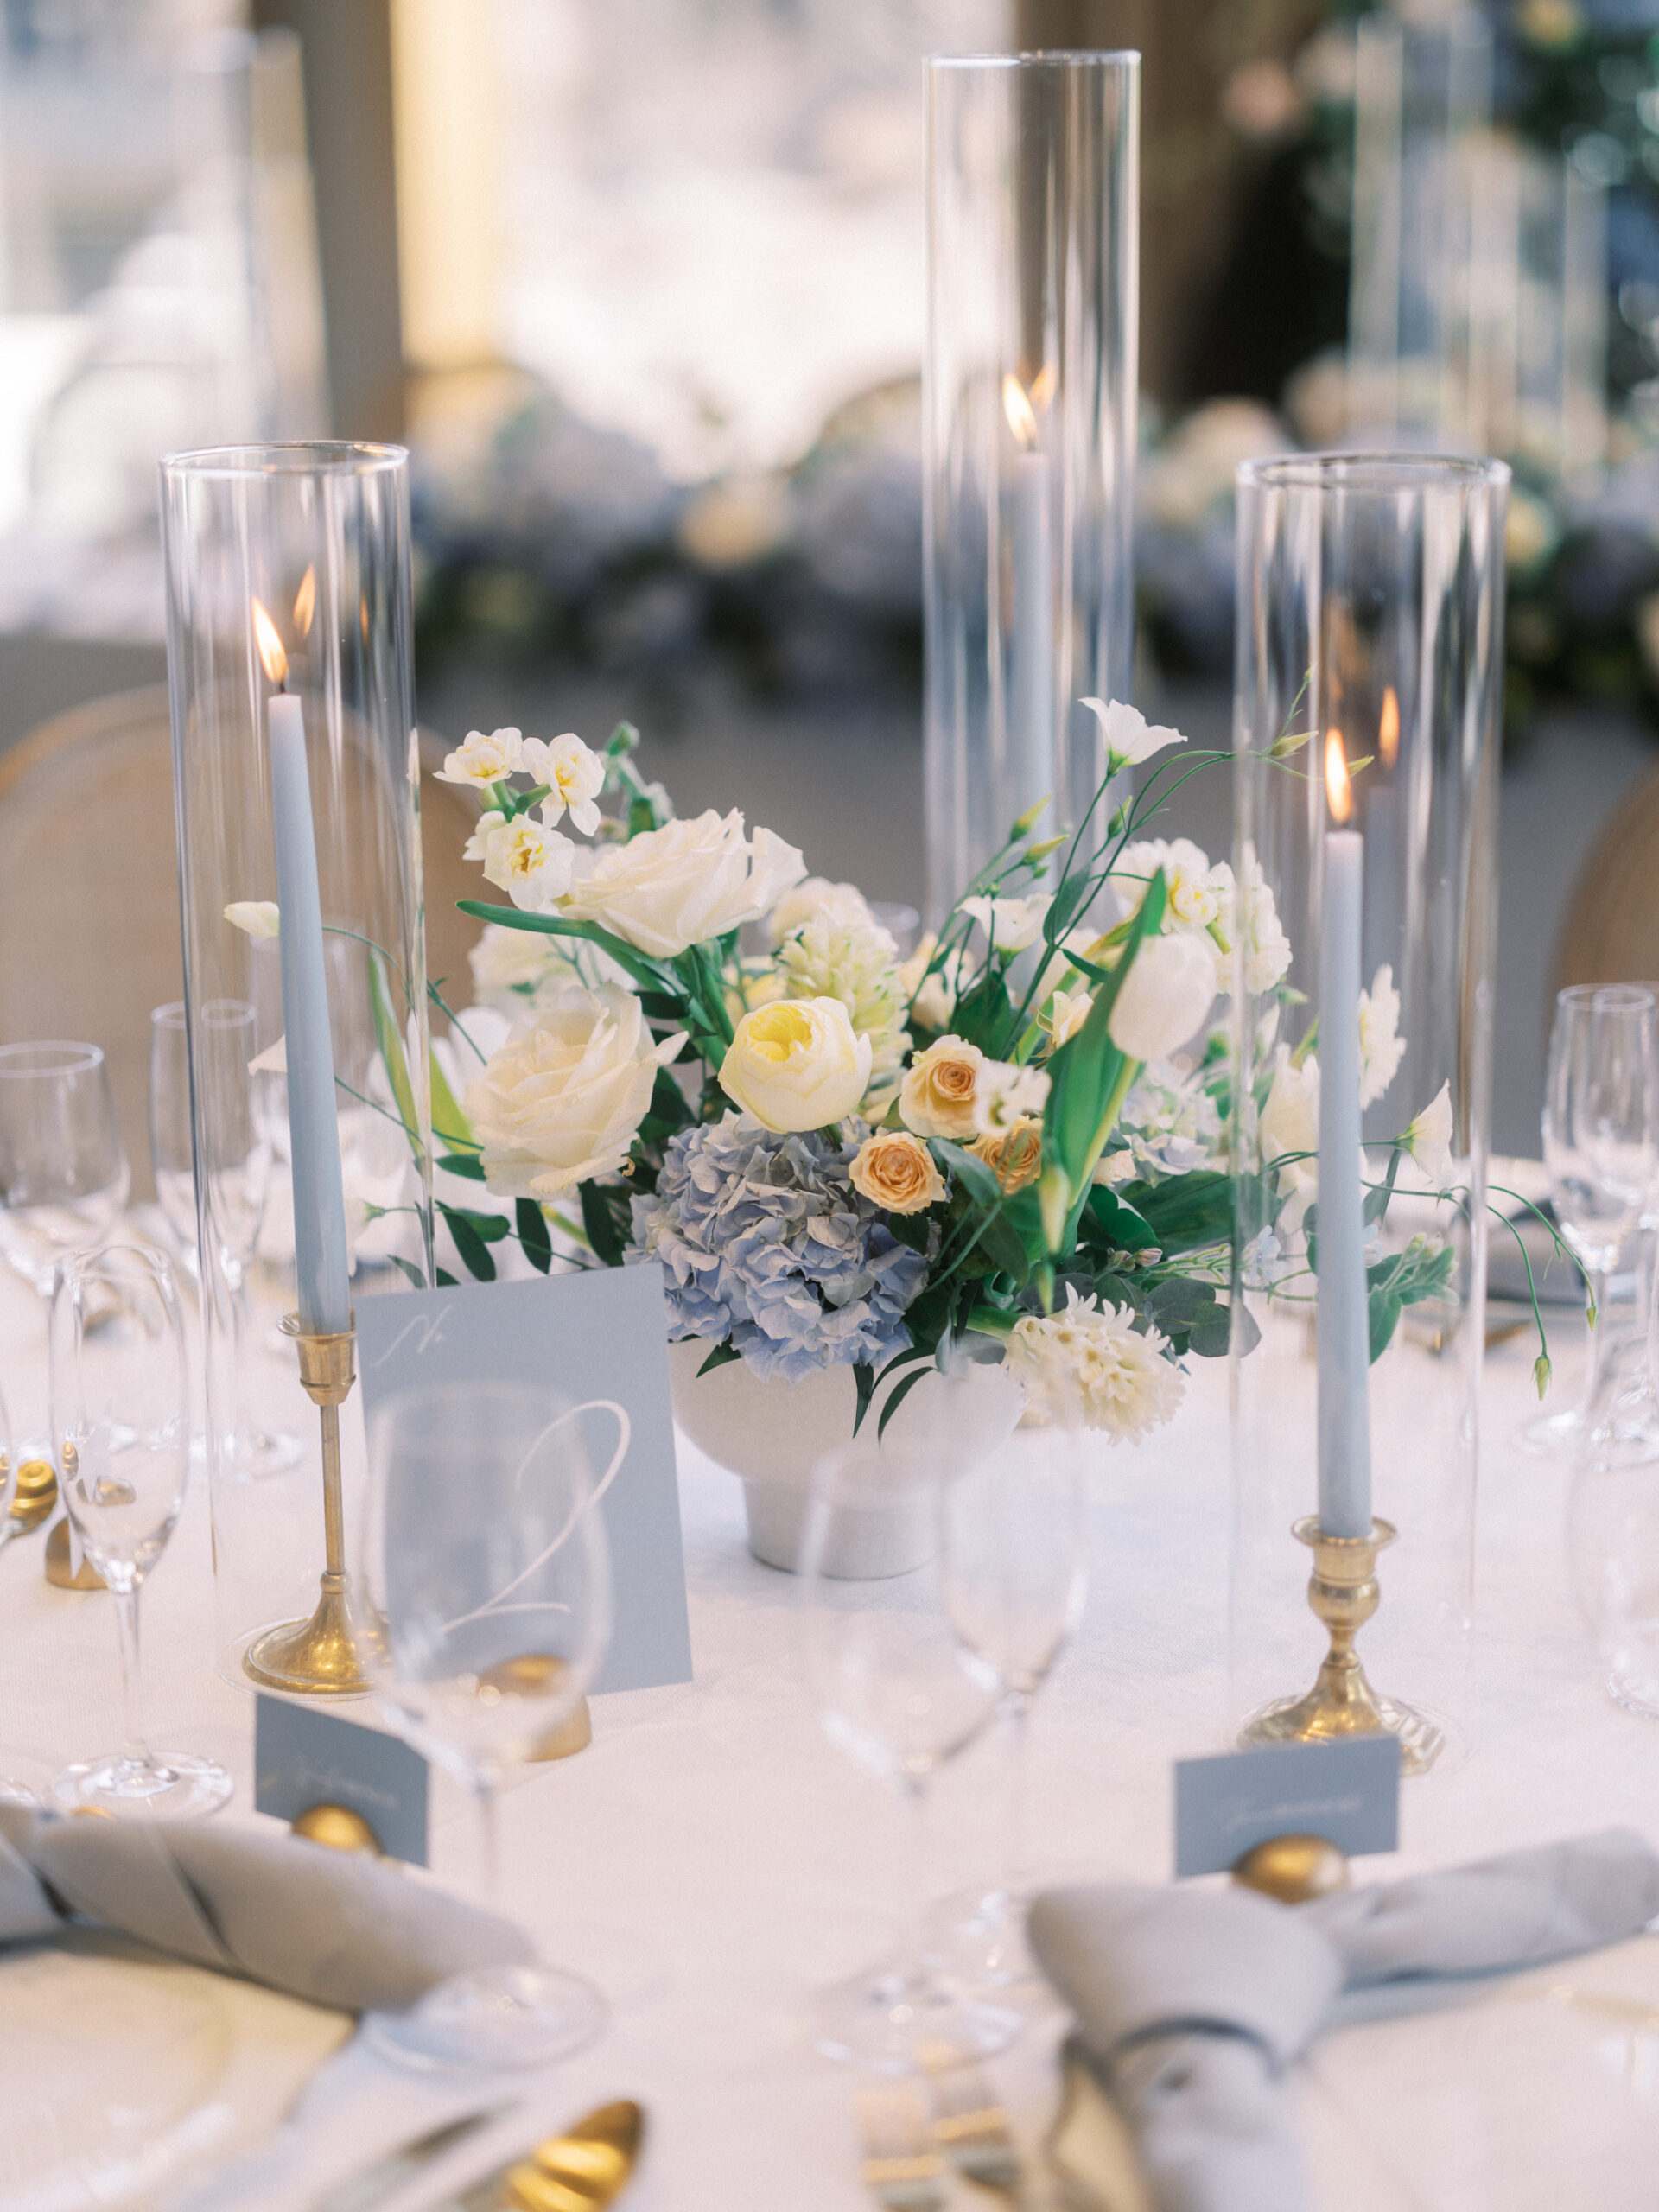 French Blue Parisian Wedding Inspiration, blue tapered candles wedding, gold cutlery, head table florals, bridal table flowers, hydrangea centrepieces, tall hydrangea centrepiece, blue ceremony arch, hydrangea ceremony arch, french wedding, light blue wedding, dusty blue florals, anemones, wedding floral inspo, blue wedding hydrangeas, nicole sarah wedding photography, gold trim wedding plates